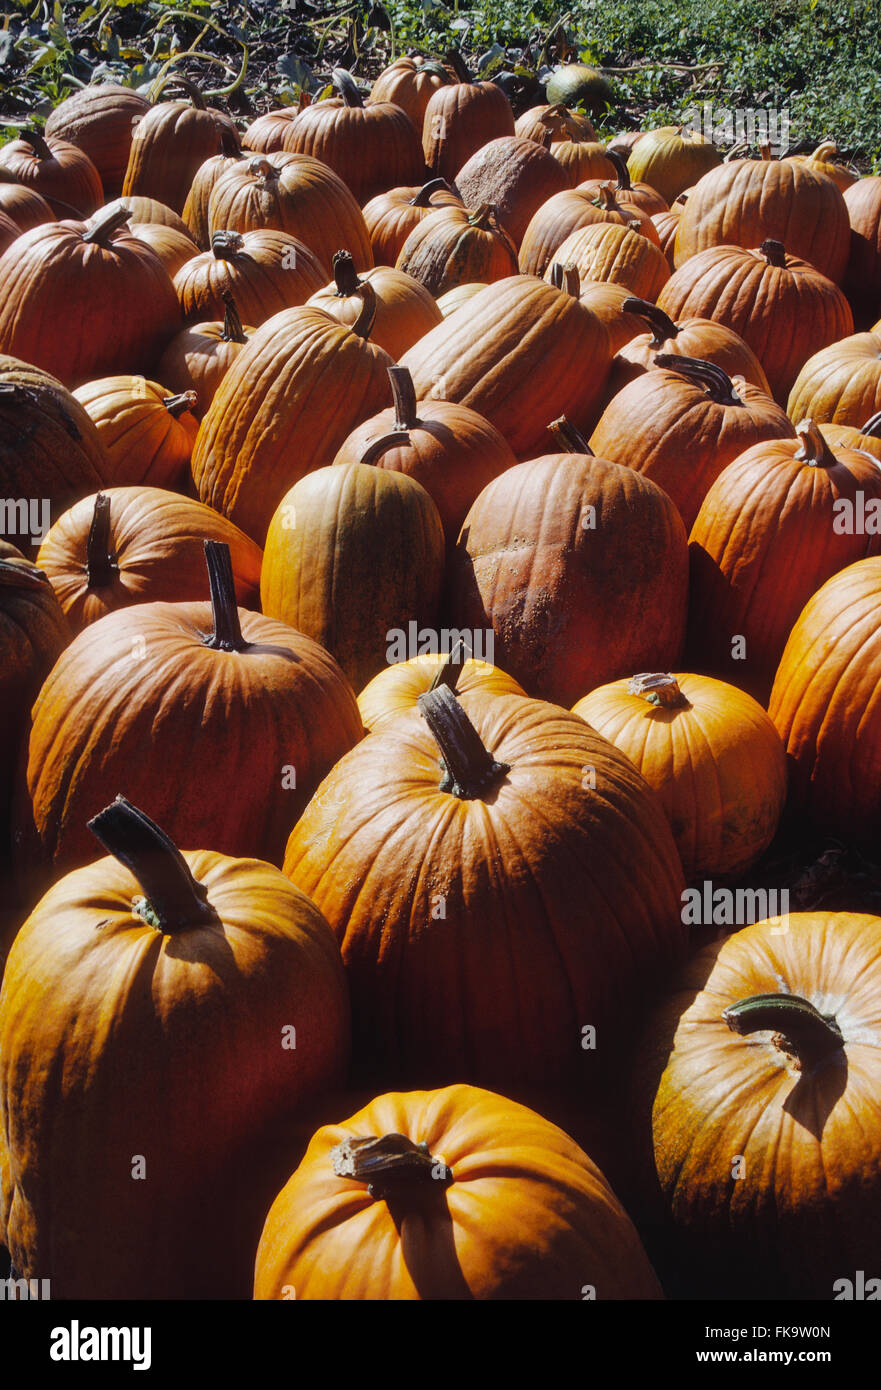 Colorful orange pumpkins lined up at farmstand Stock Photo